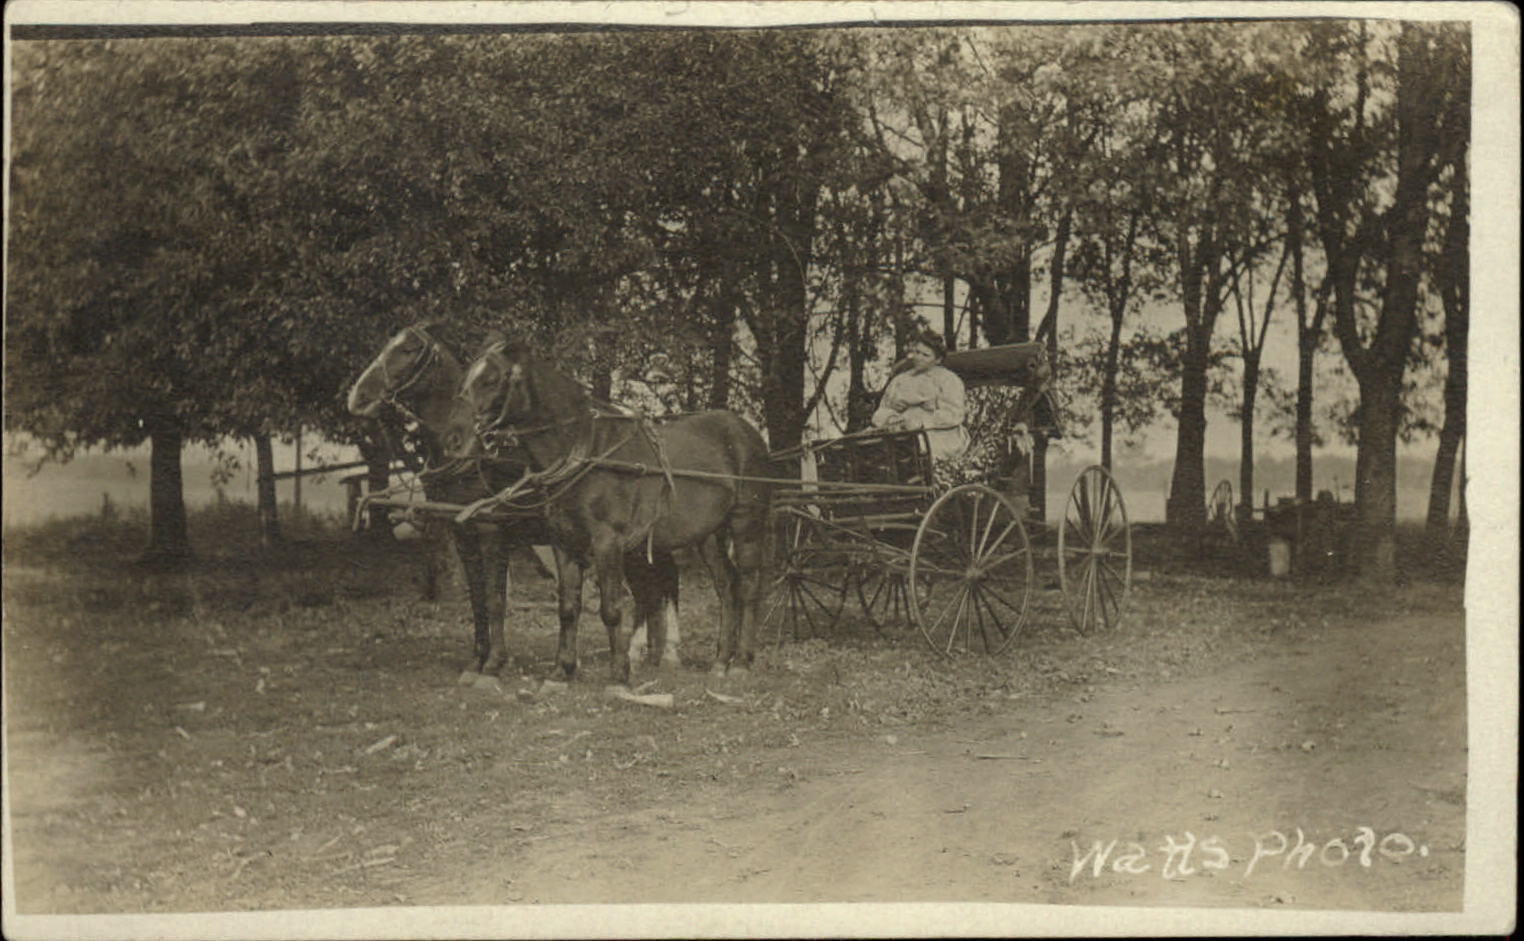 RPPC horse drawn carriage woman campground? Near lake Velox real photo 1907-17